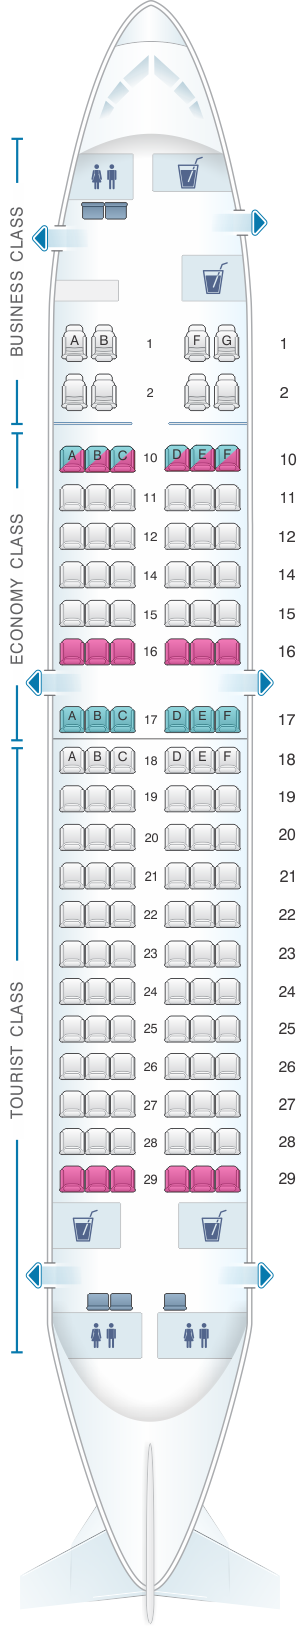 Seat map for Transaero Airlines Boeing B737 300